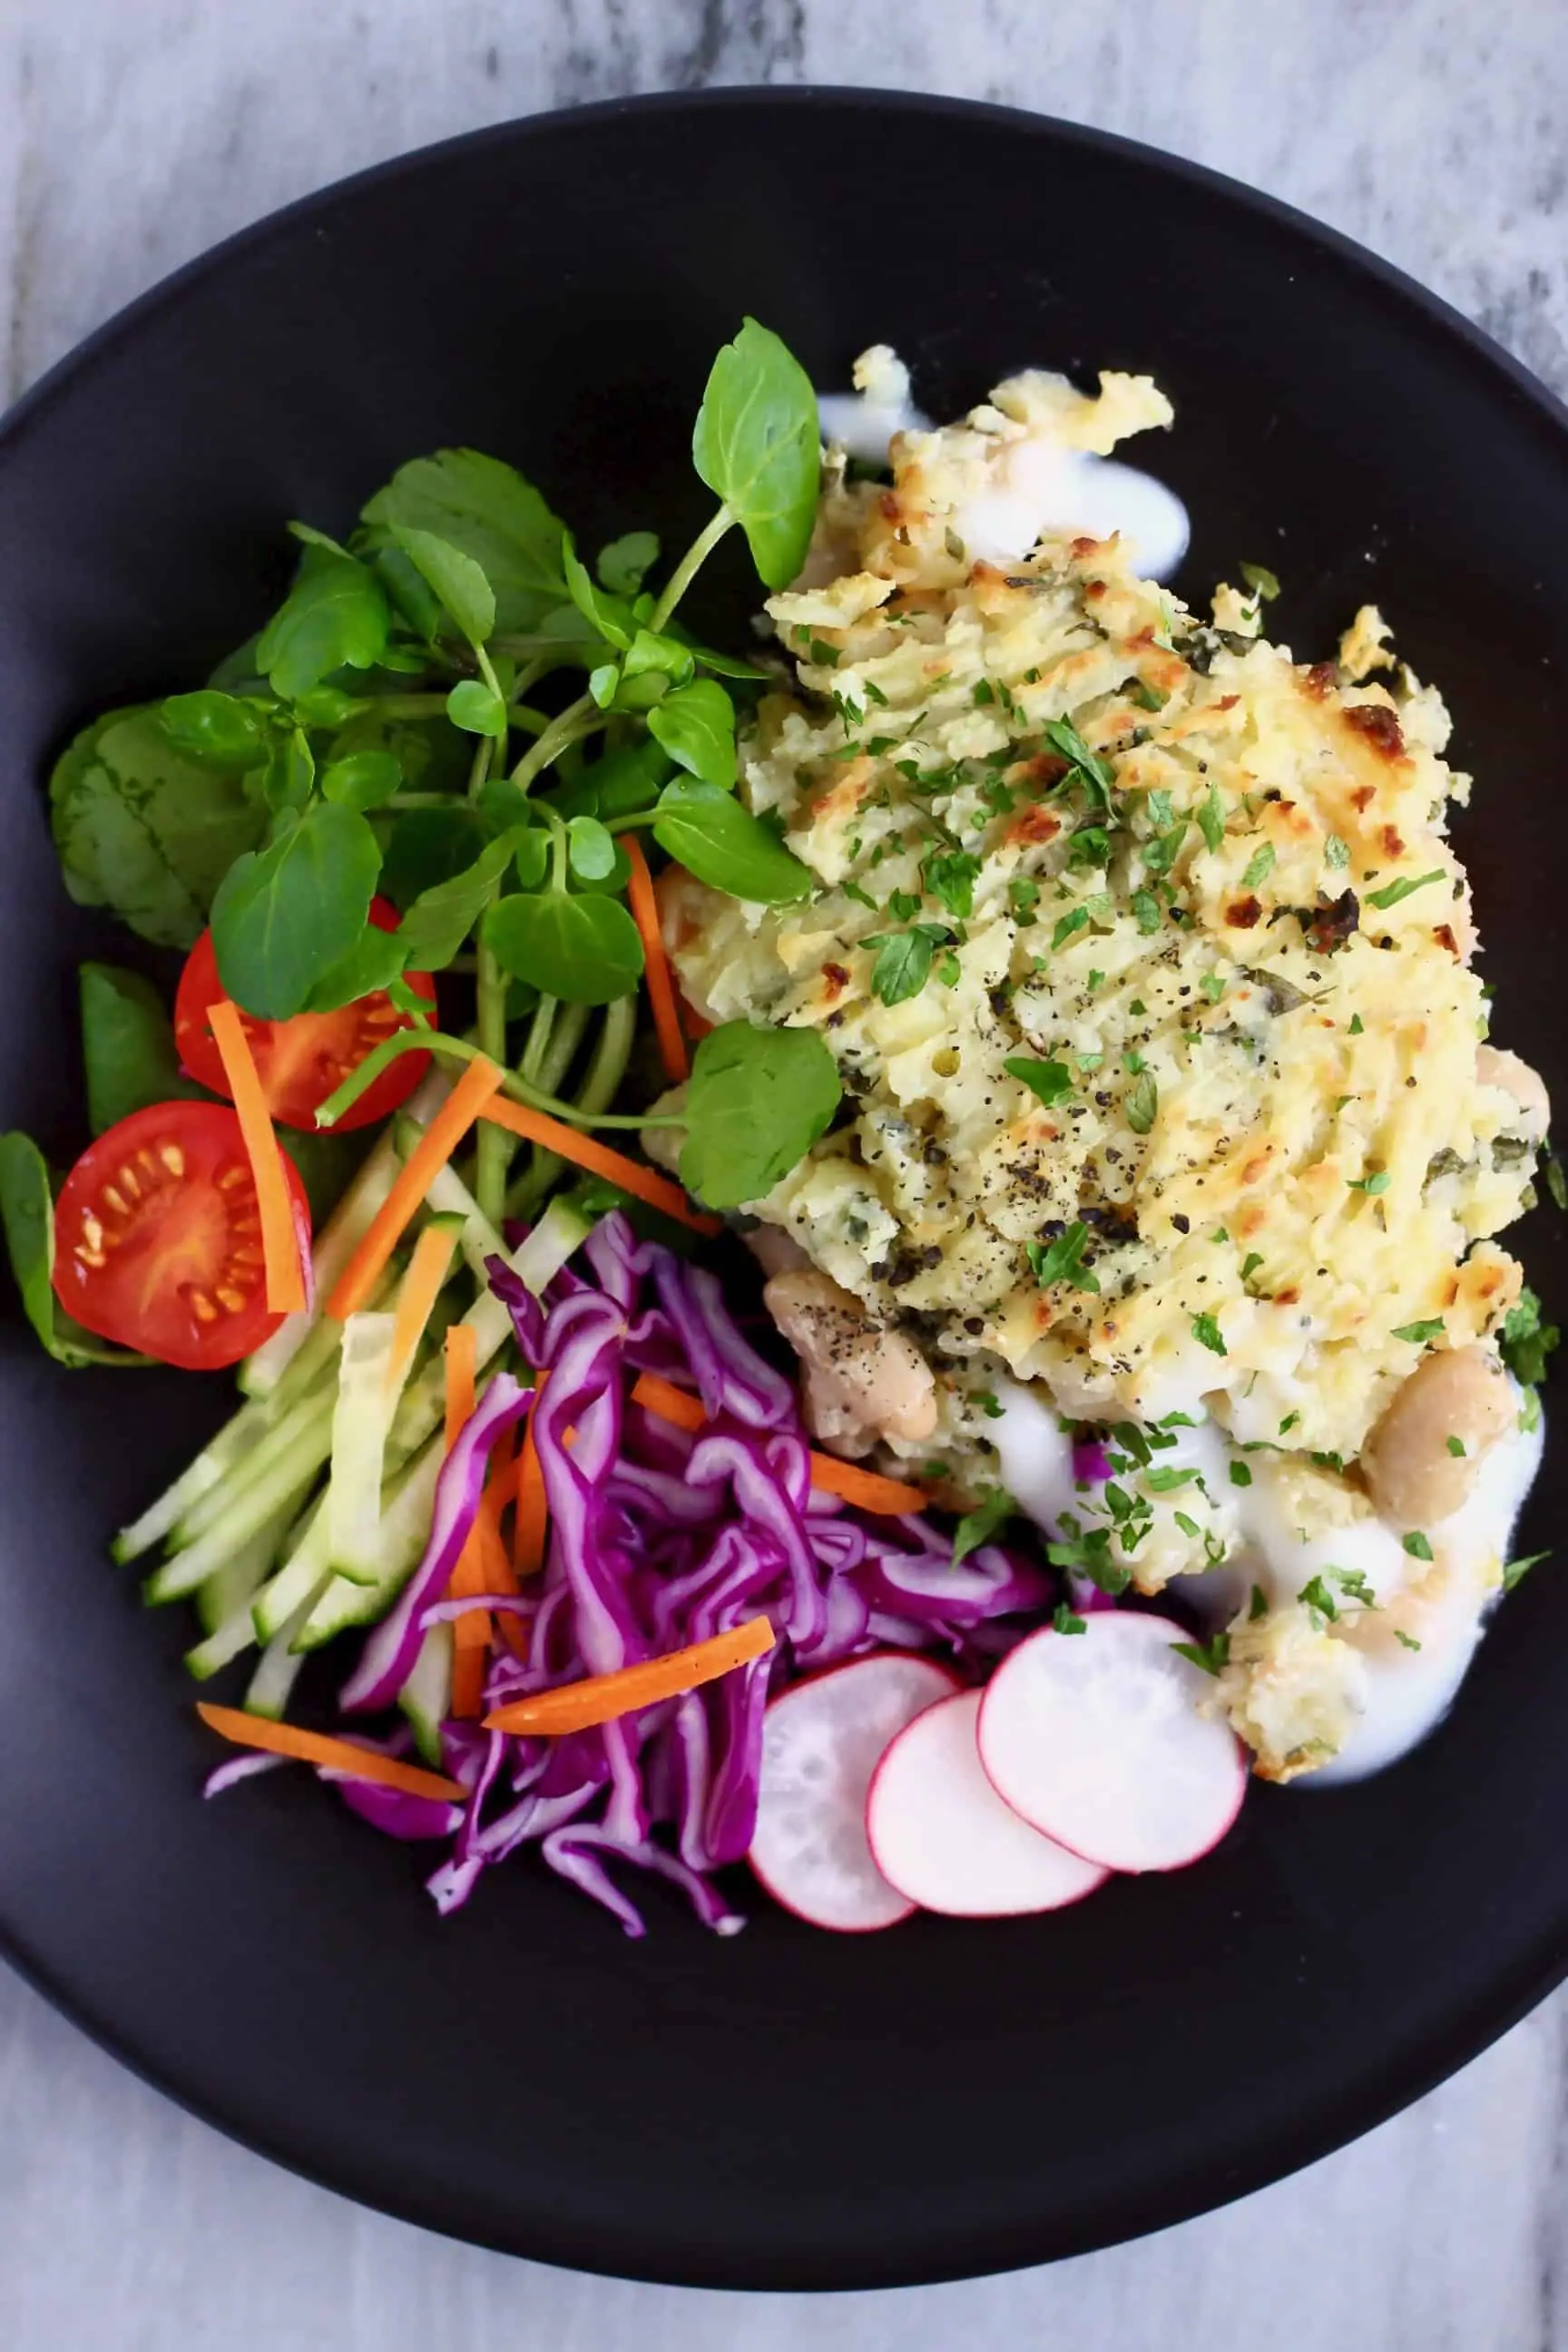 Vegan fish pie with watercress, sliced radishes and shredded purple cabbage on a black plate